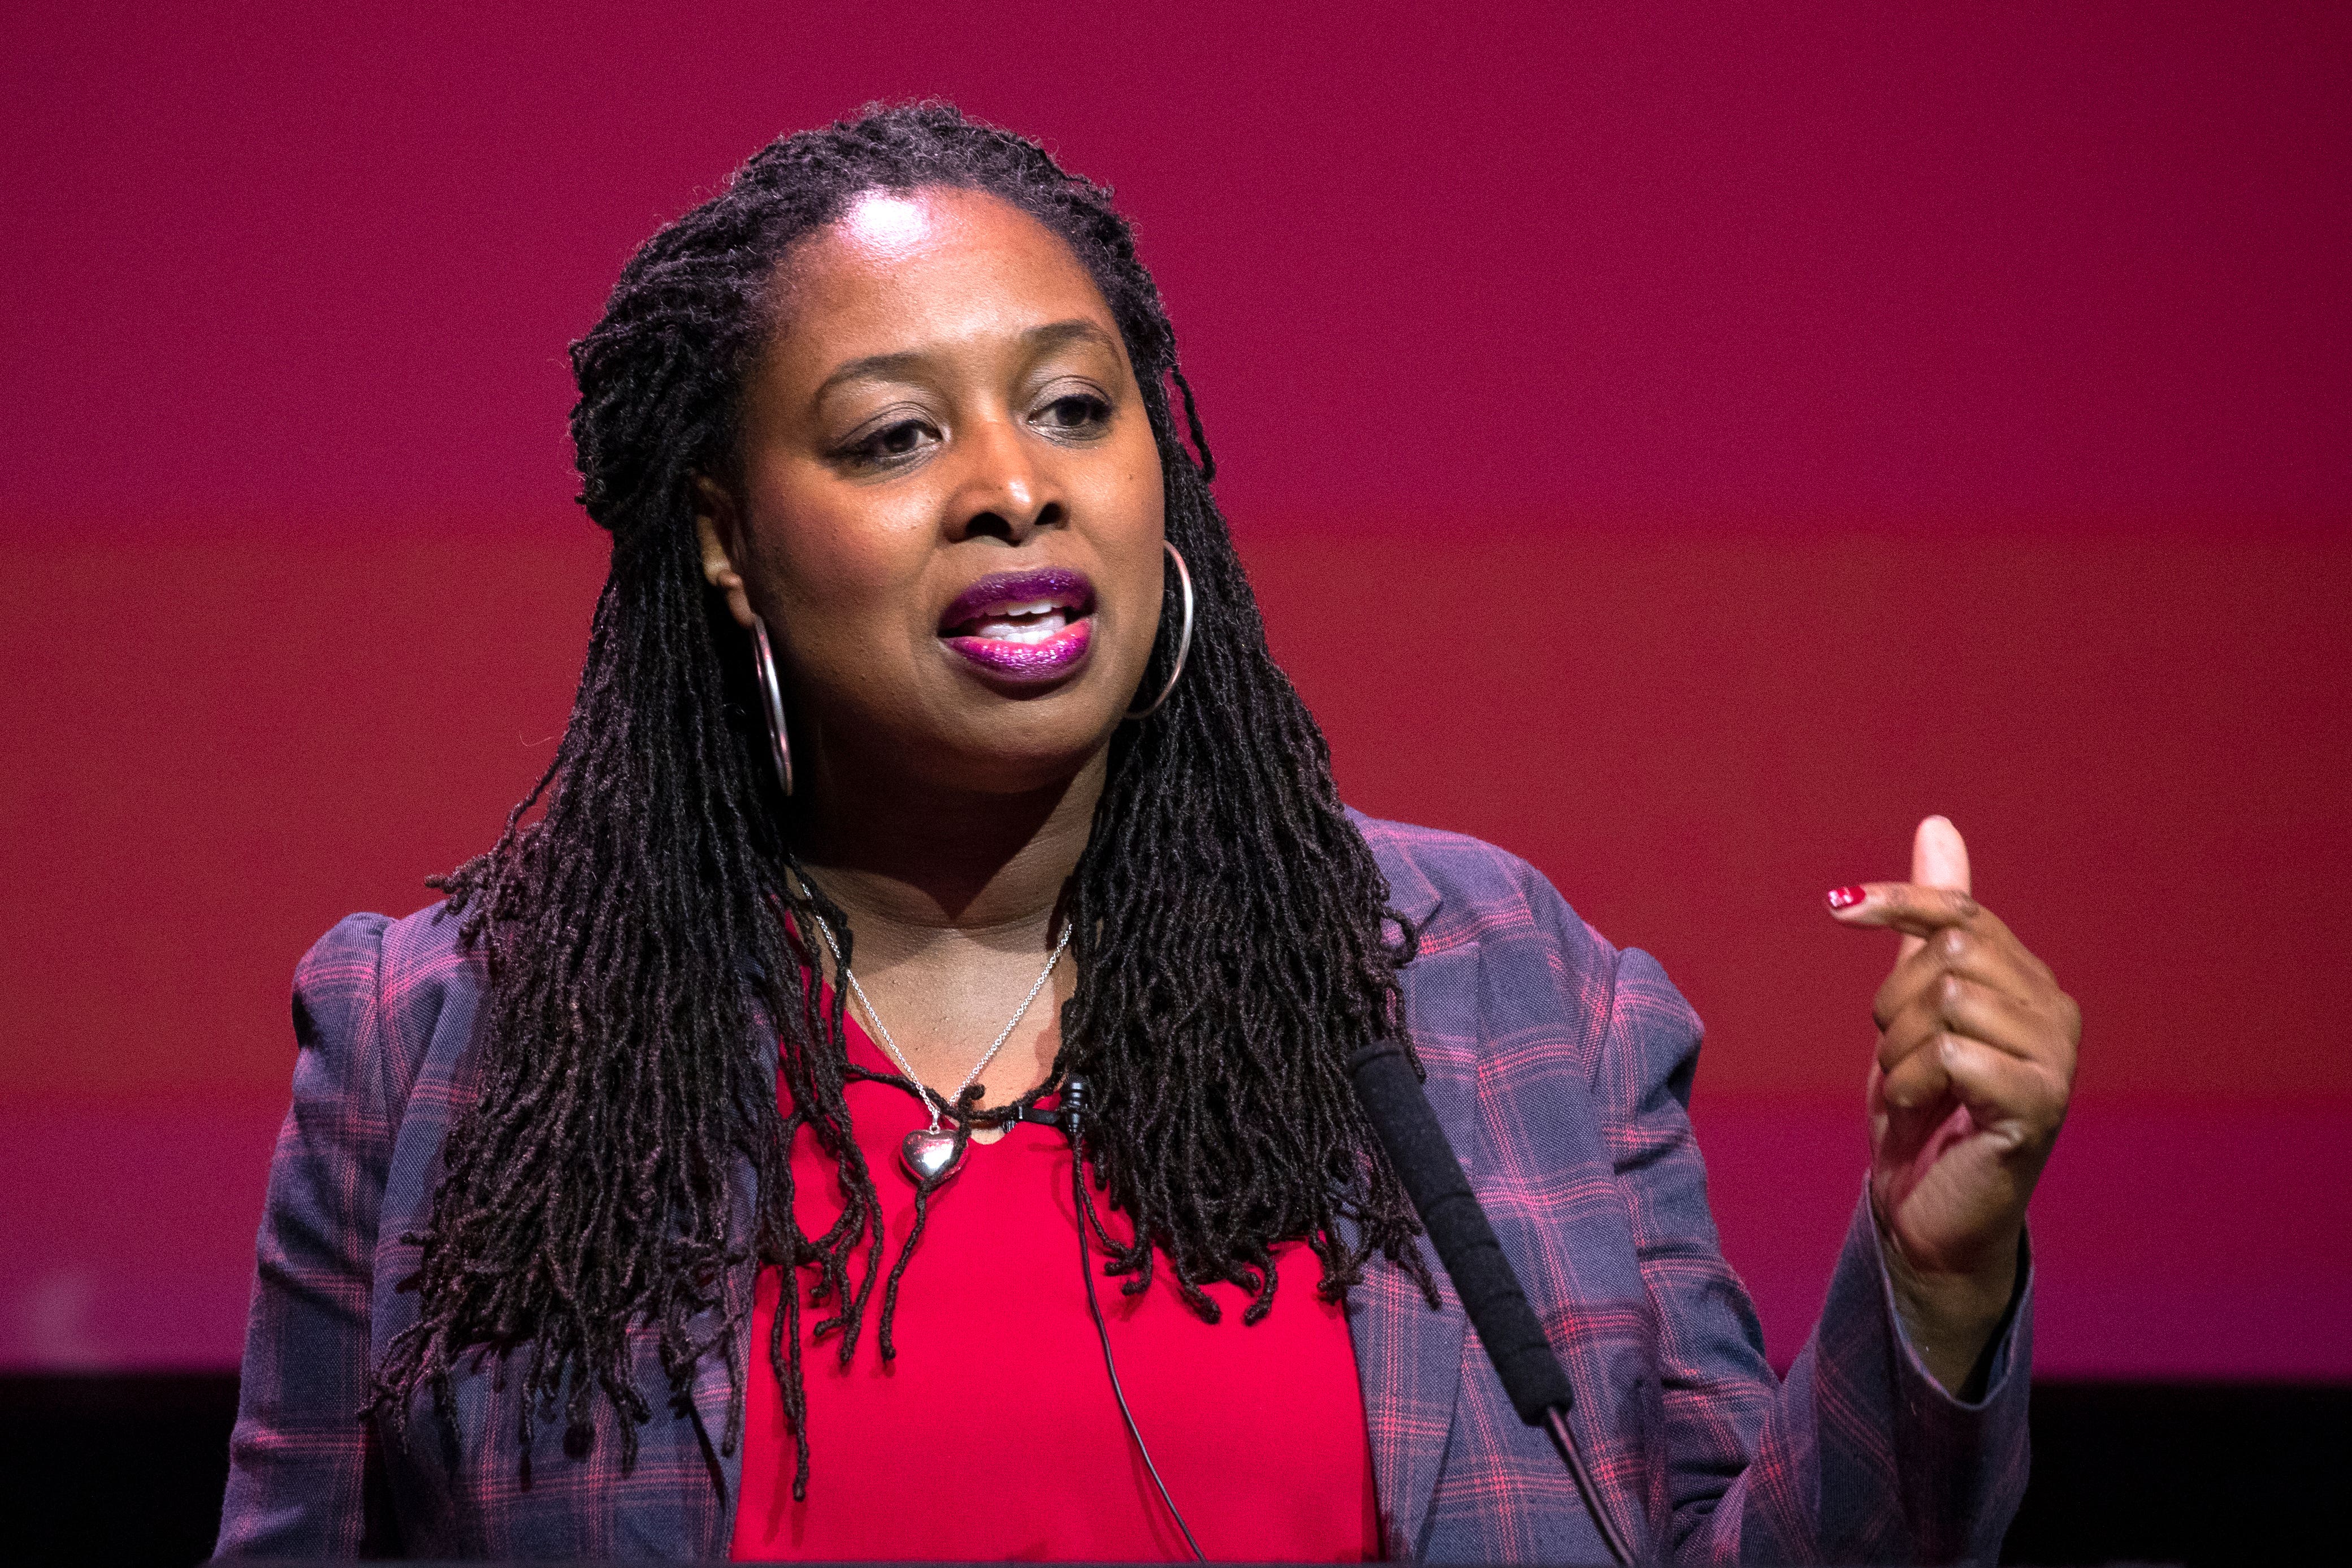 Labour MP Dawn Butler has received racist abuse during the election campaign (Jane Barlow/PA)